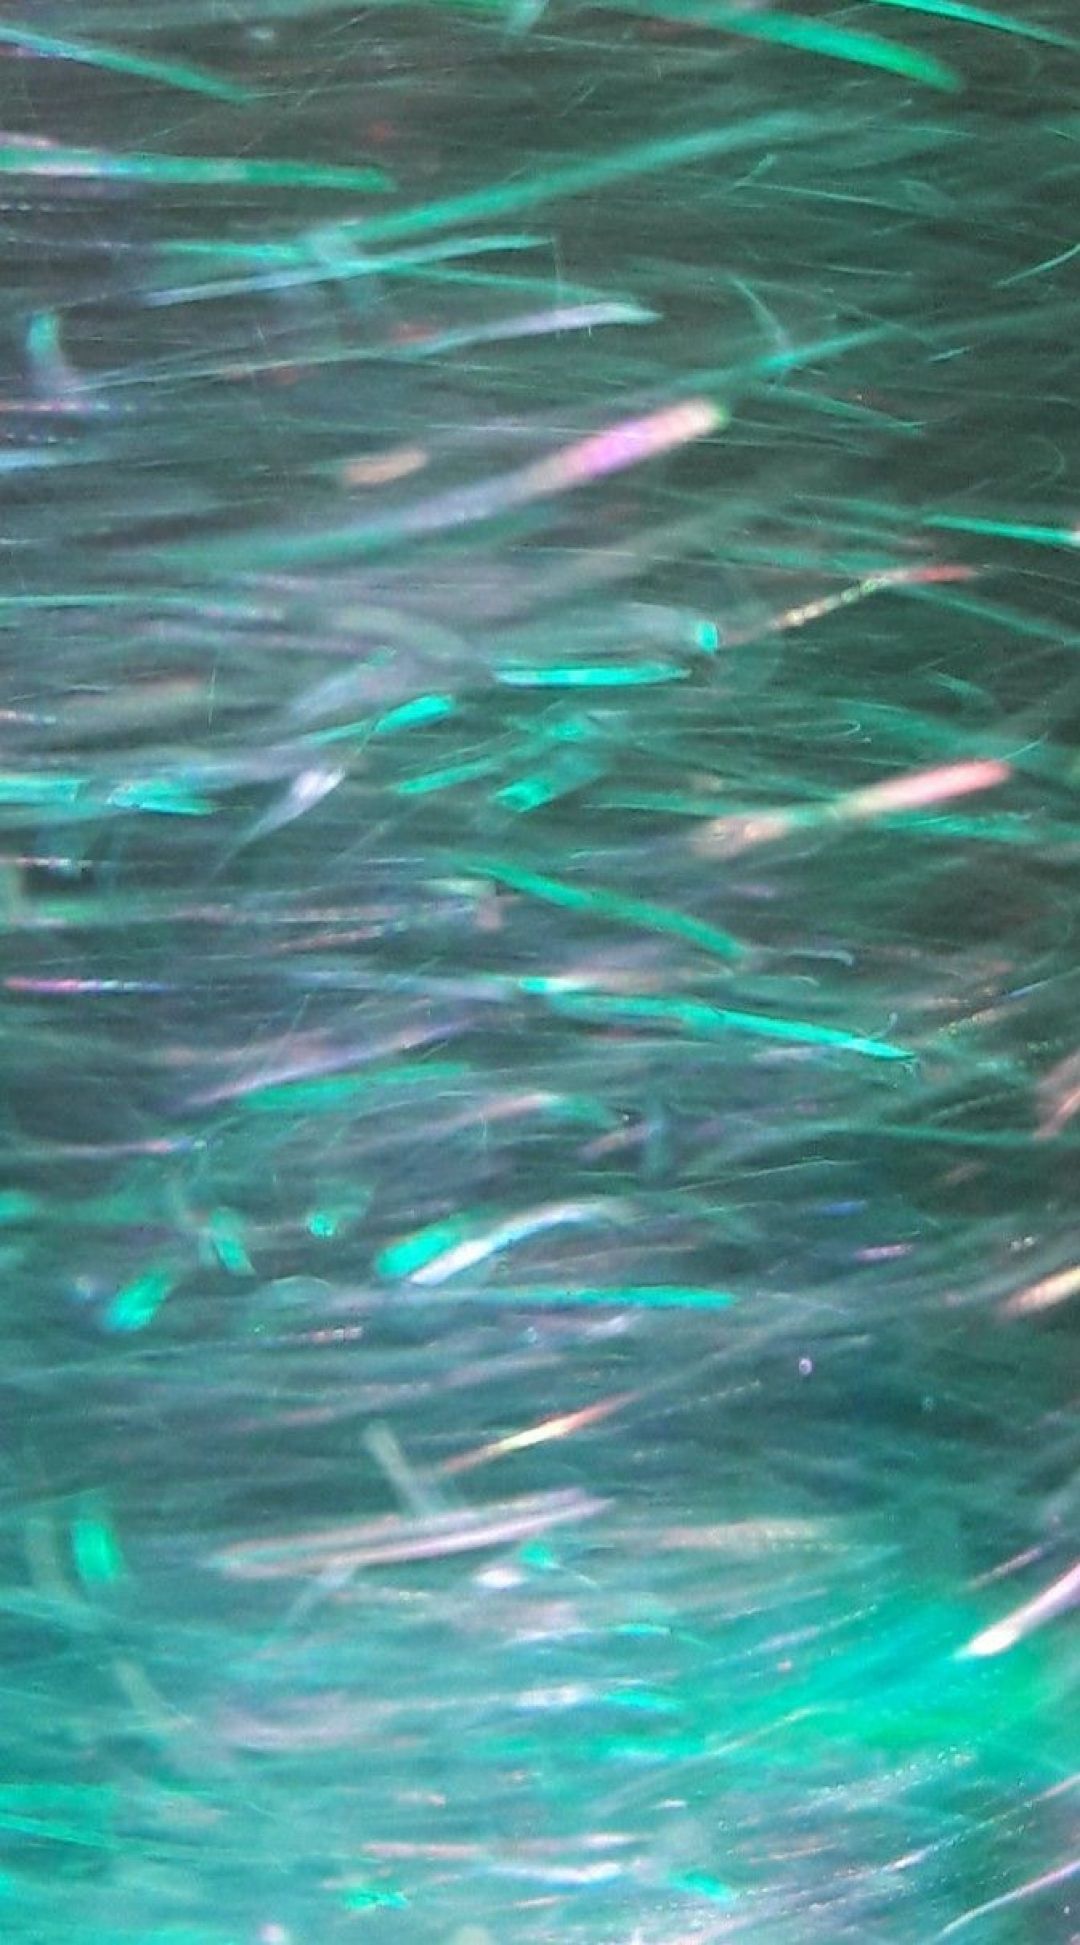 A close up of a shiny, iridescent material with a green tint - Mint green